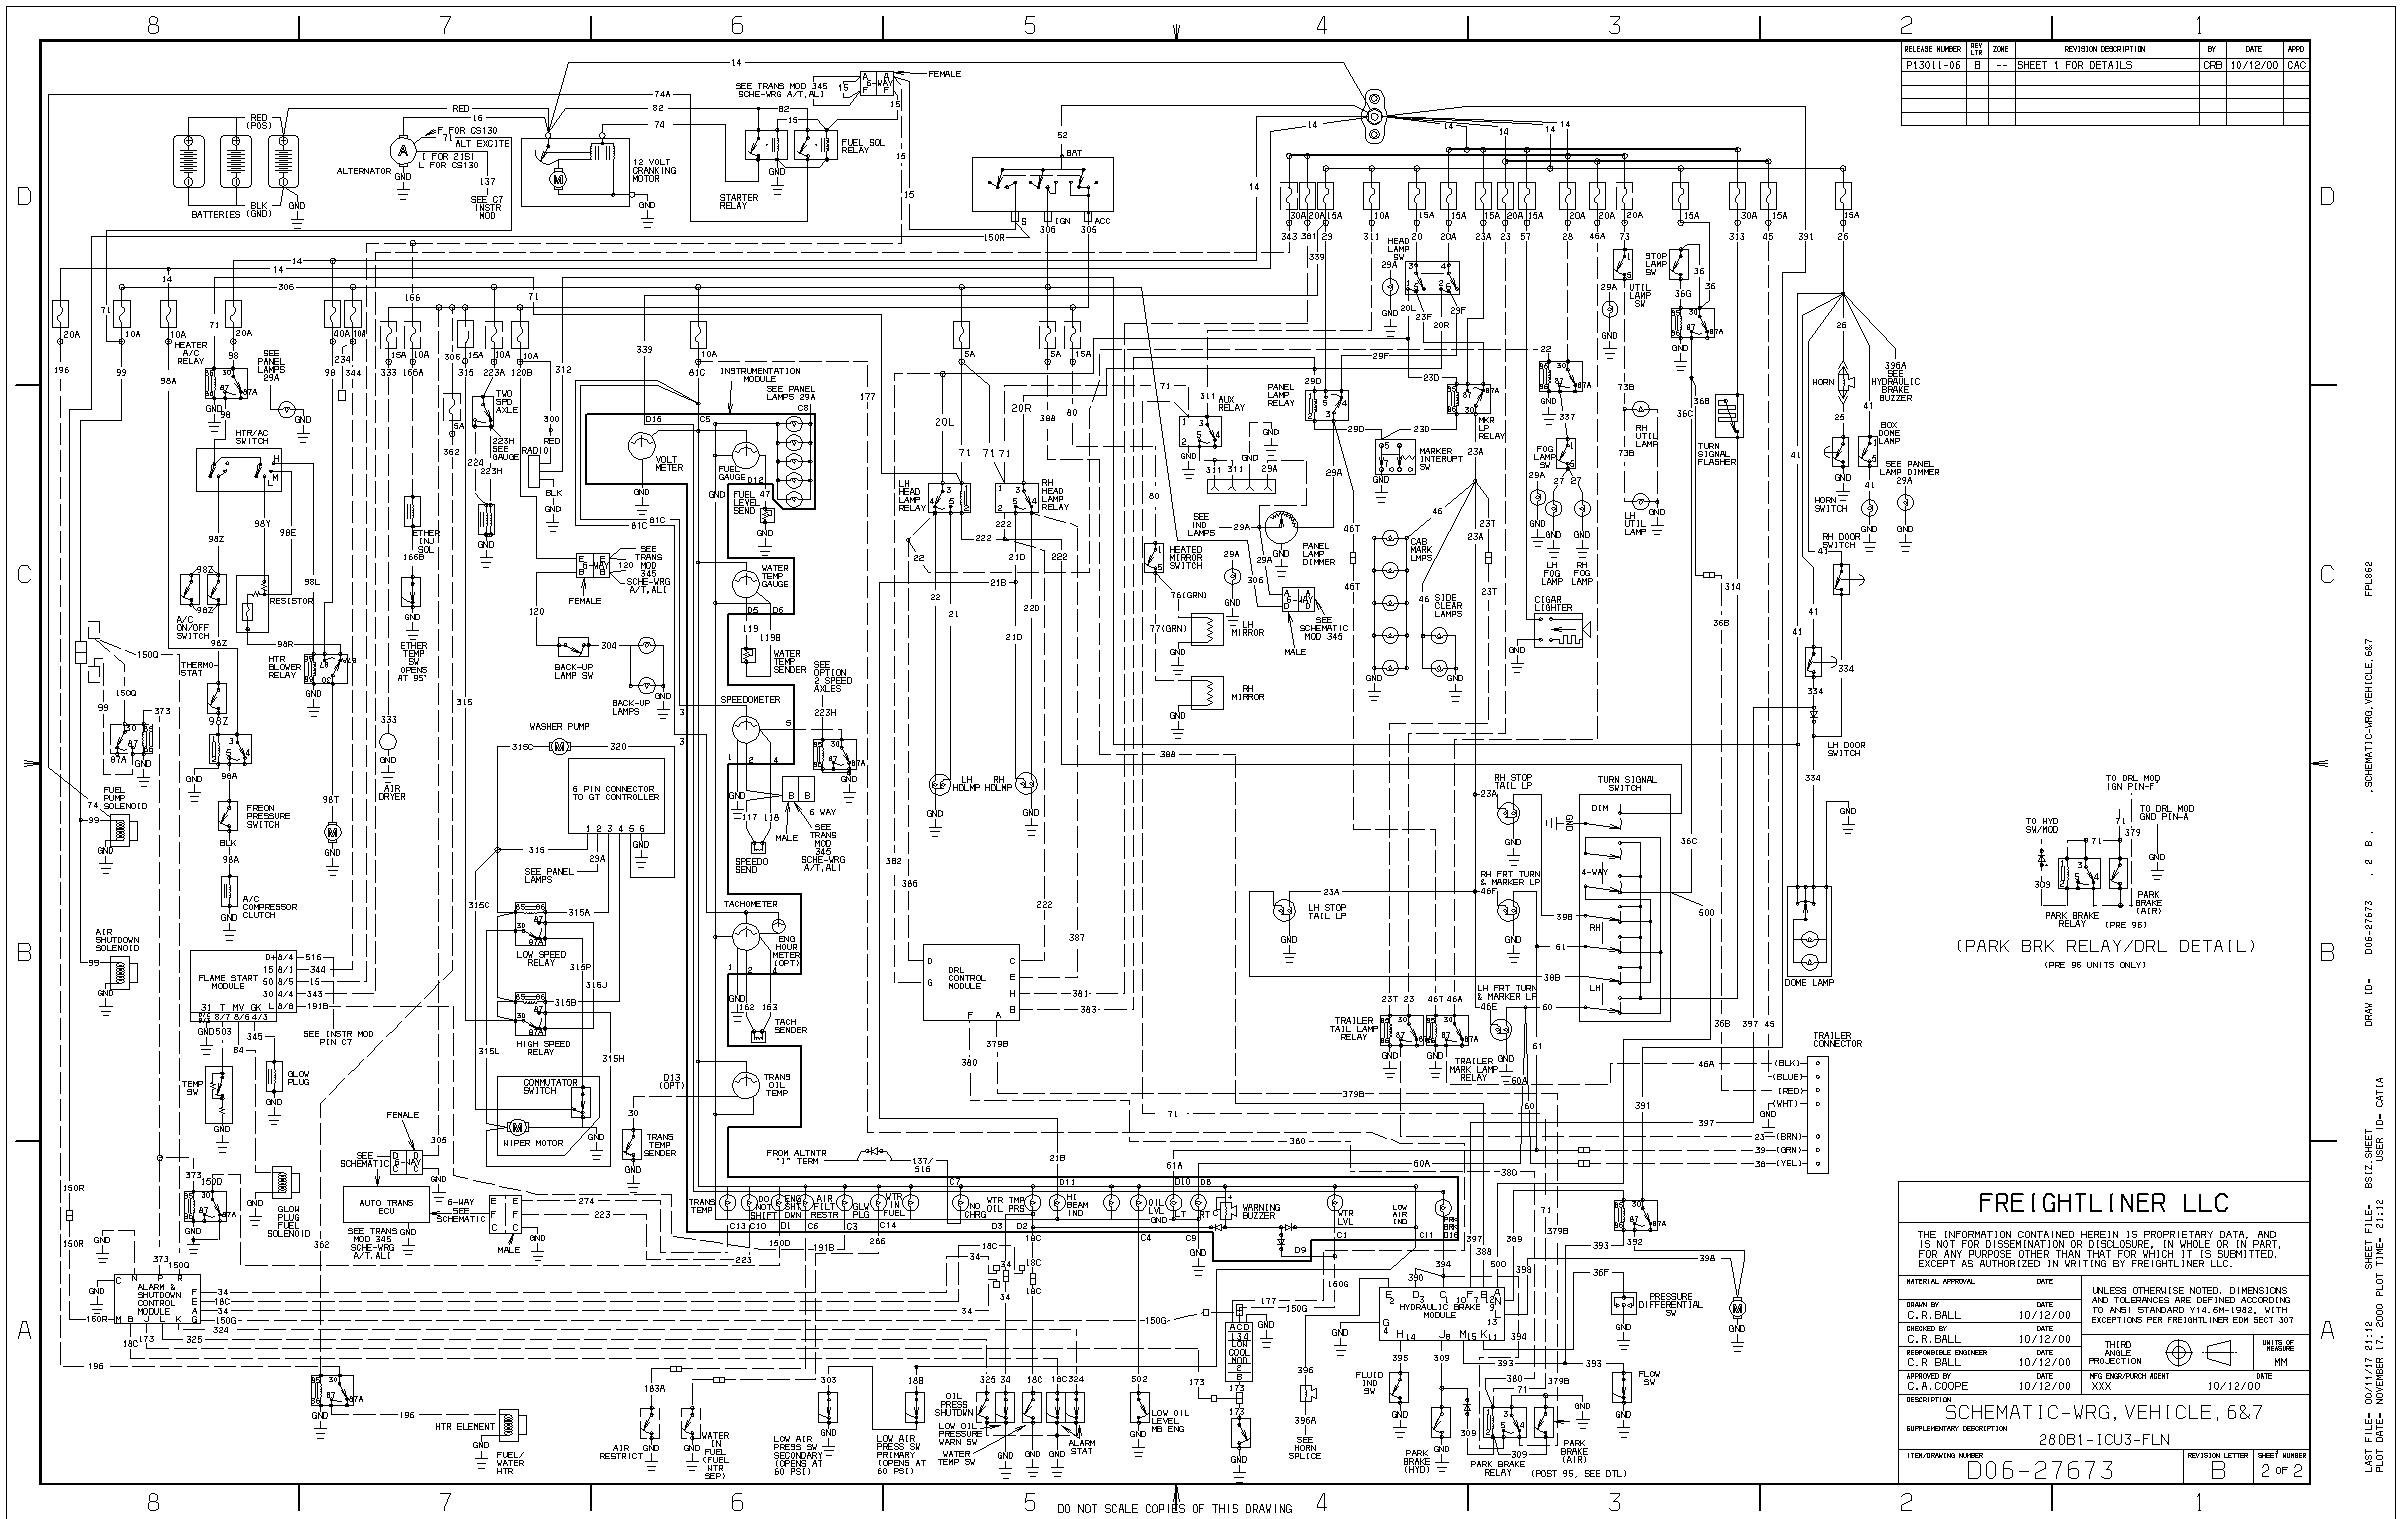 Freightliner Fl70 Wiring Diagram I Have 2003 Fl70 Freightliner and I Need A Wiring Diagram for the Instrument Cluster and the